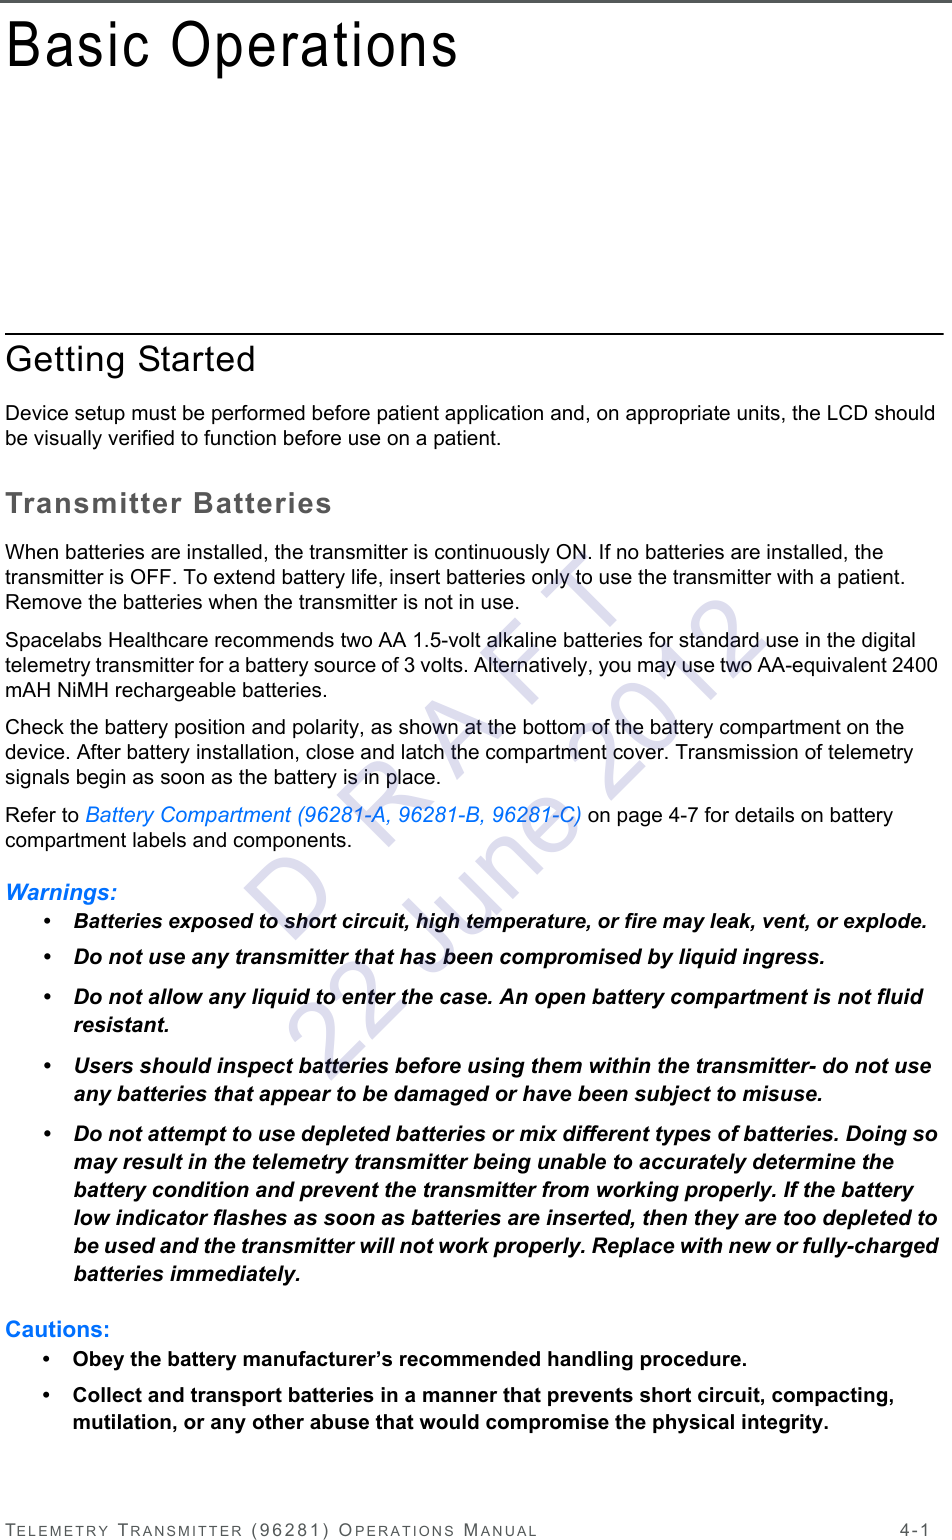 TELEMETRY TRANSMITTER (96281) OPERATIONS MANUAL 4-1Basic OperationsGetting StartedDevice setup must be performed before patient application and, on appropriate units, the LCD should be visually verified to function before use on a patient.Transmitter BatteriesWhen batteries are installed, the transmitter is continuously ON. If no batteries are installed, the transmitter is OFF. To extend battery life, insert batteries only to use the transmitter with a patient. Remove the batteries when the transmitter is not in use. Spacelabs Healthcare recommends two AA 1.5-volt alkaline batteries for standard use in the digital telemetry transmitter for a battery source of 3 volts. Alternatively, you may use two AA-equivalent 2400 mAH NiMH rechargeable batteries.Check the battery position and polarity, as shown at the bottom of the battery compartment on the device. After battery installation, close and latch the compartment cover. Transmission of telemetry signals begin as soon as the battery is in place.Refer to Battery Compartment (96281-A, 96281-B, 96281-C) on page 4-7 for details on battery compartment labels and components.Warnings:• Batteries exposed to short circuit, high temperature, or fire may leak, vent, or explode.• Do not use any transmitter that has been compromised by liquid ingress.• Do not allow any liquid to enter the case. An open battery compartment is not fluid resistant.• Users should inspect batteries before using them within the transmitter- do not use any batteries that appear to be damaged or have been subject to misuse.• Do not attempt to use depleted batteries or mix different types of batteries. Doing so may result in the telemetry transmitter being unable to accurately determine the battery condition and prevent the transmitter from working properly. If the battery low indicator flashes as soon as batteries are inserted, then they are too depleted to be used and the transmitter will not work properly. Replace with new or fully-charged batteries immediately.Cautions:• Obey the battery manufacturer’s recommended handling procedure. • Collect and transport batteries in a manner that prevents short circuit, compacting, mutilation, or any other abuse that would compromise the physical integrity.D  R A F T 22 June 2012